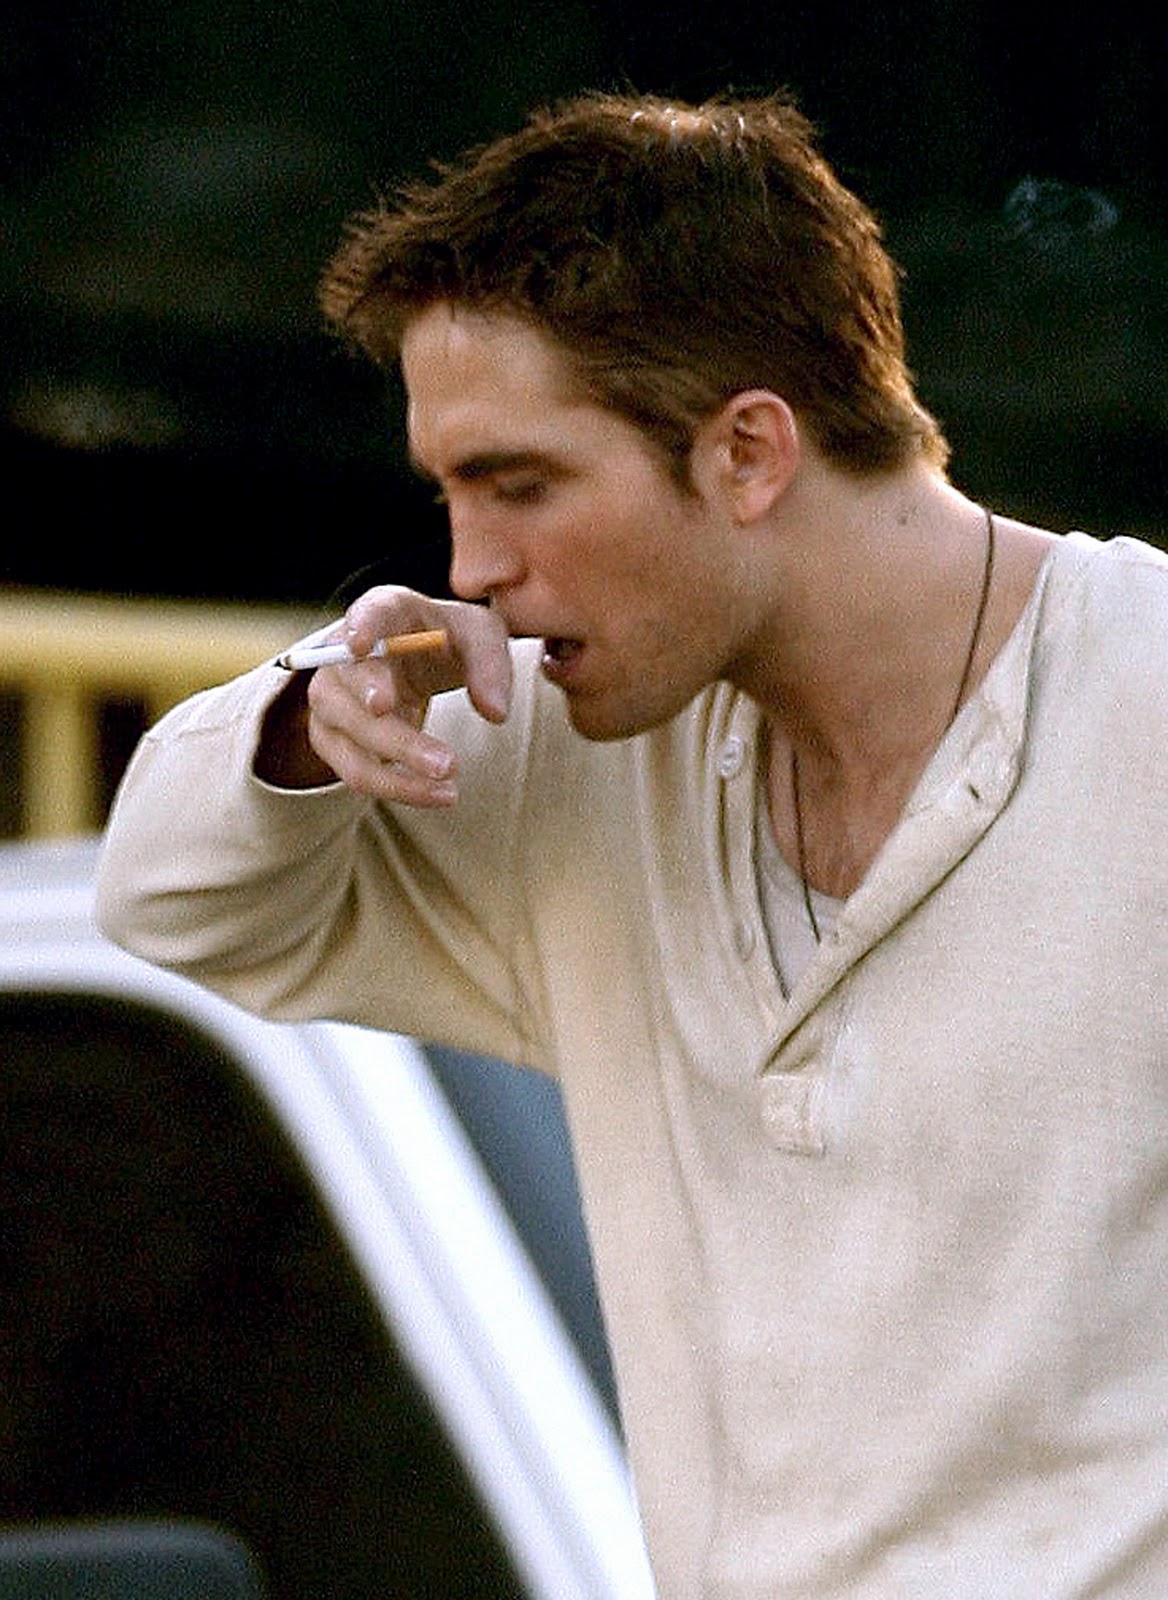 Pattinson Gallery: HQ Pictures of Robert Pattinson on WFE Set Yesterday1168 x 1600